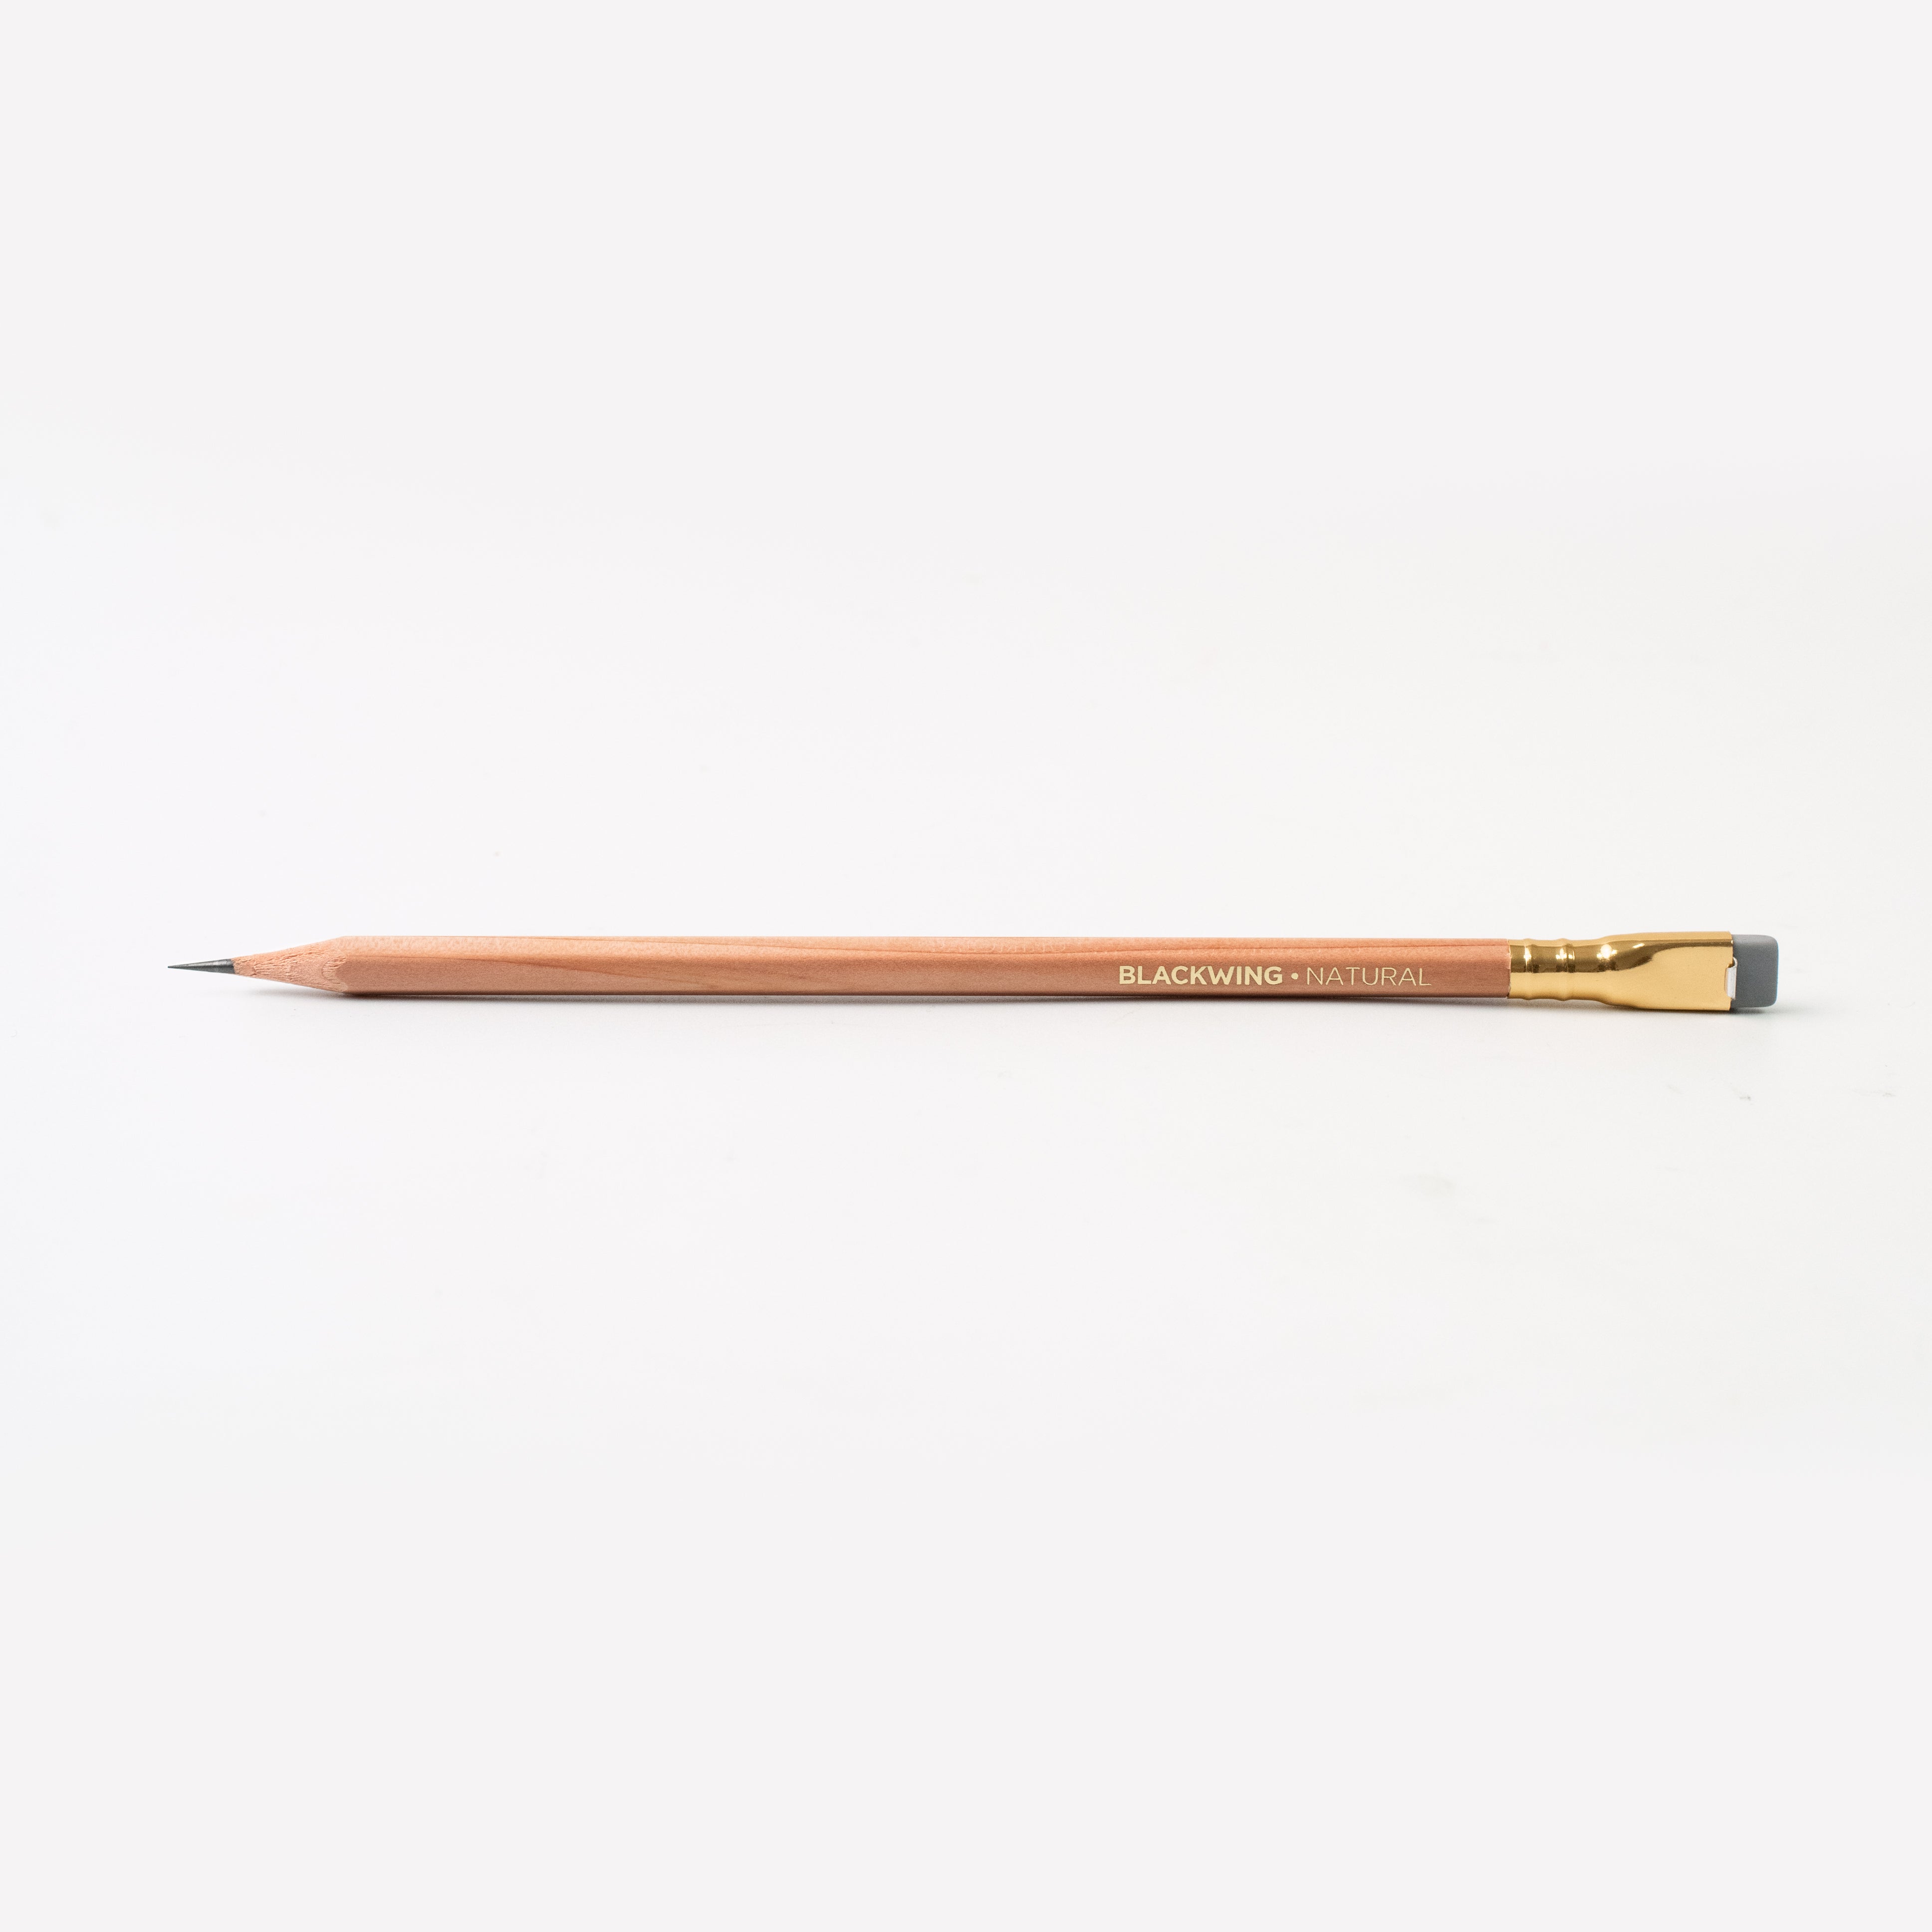 What Makes a No. 2 Pencil Different?